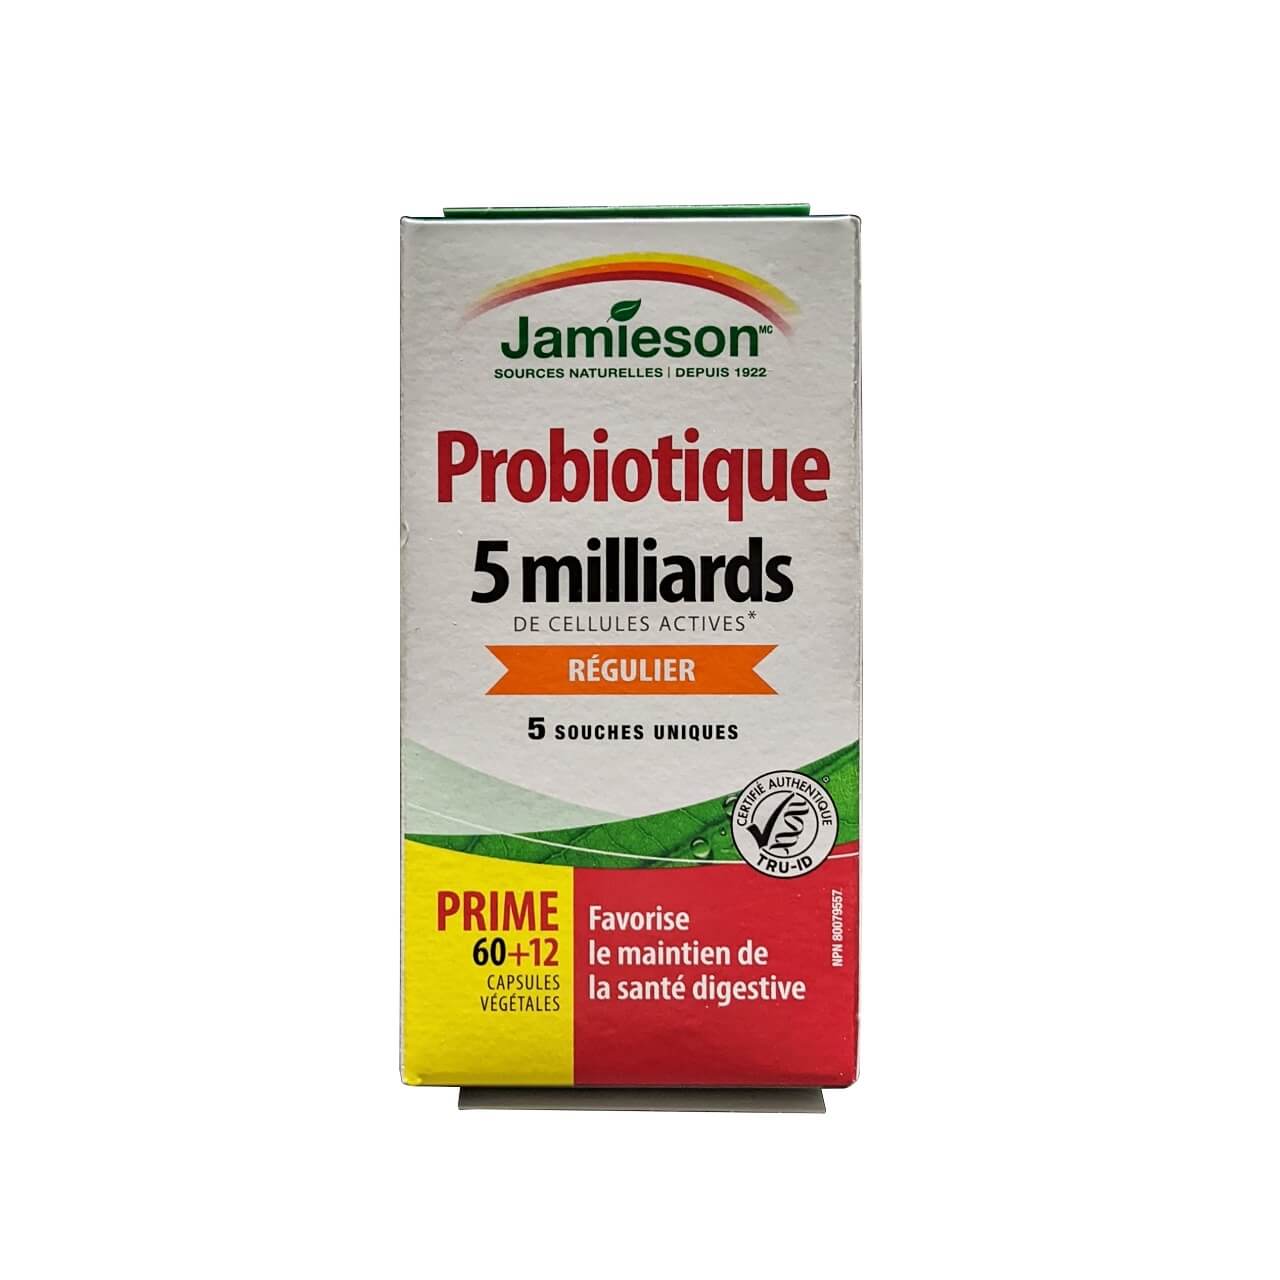 Product label for Jamieson Probiotic 5 Billion Active Cells Regular Strength (72 capsules) in French